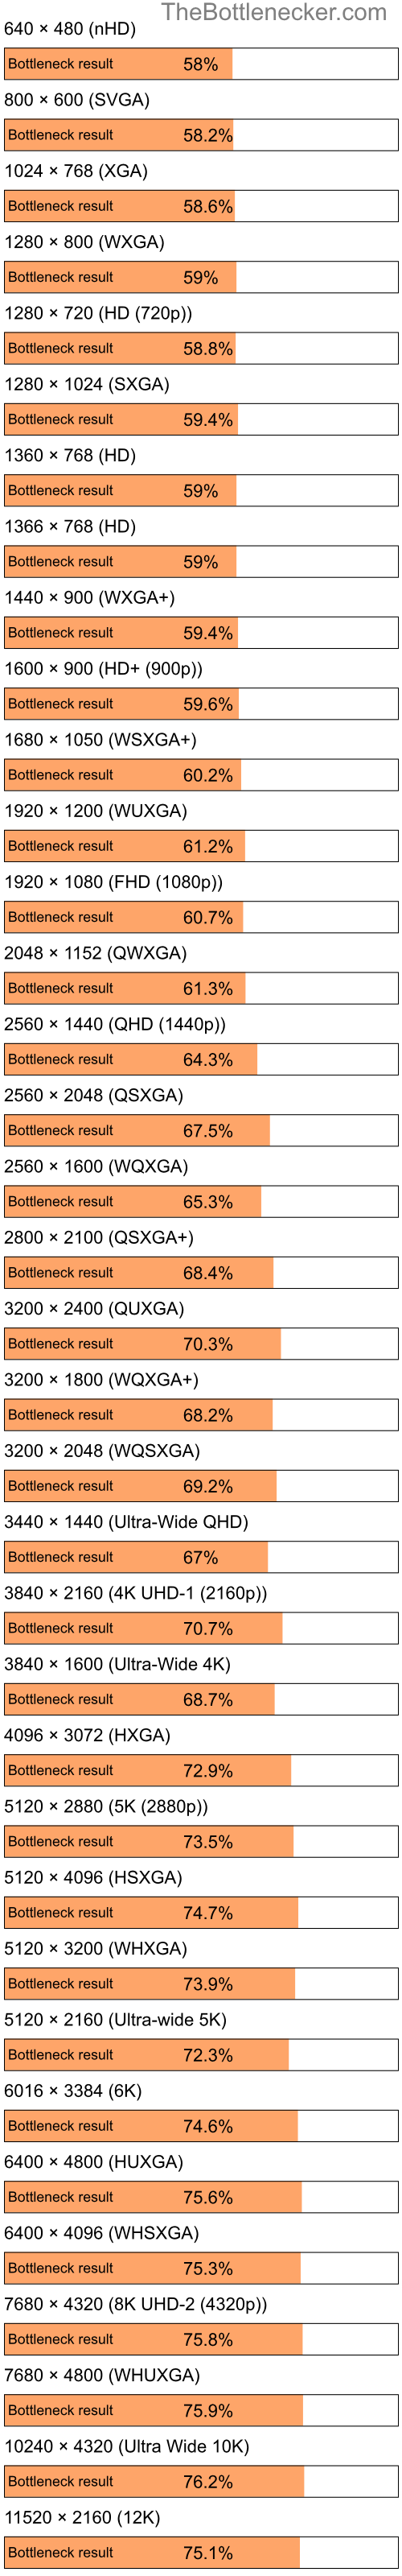 Bottleneck results by resolution for Intel Pentium 4 and AMD Radeon X1600 Pro in Processor Intense Tasks